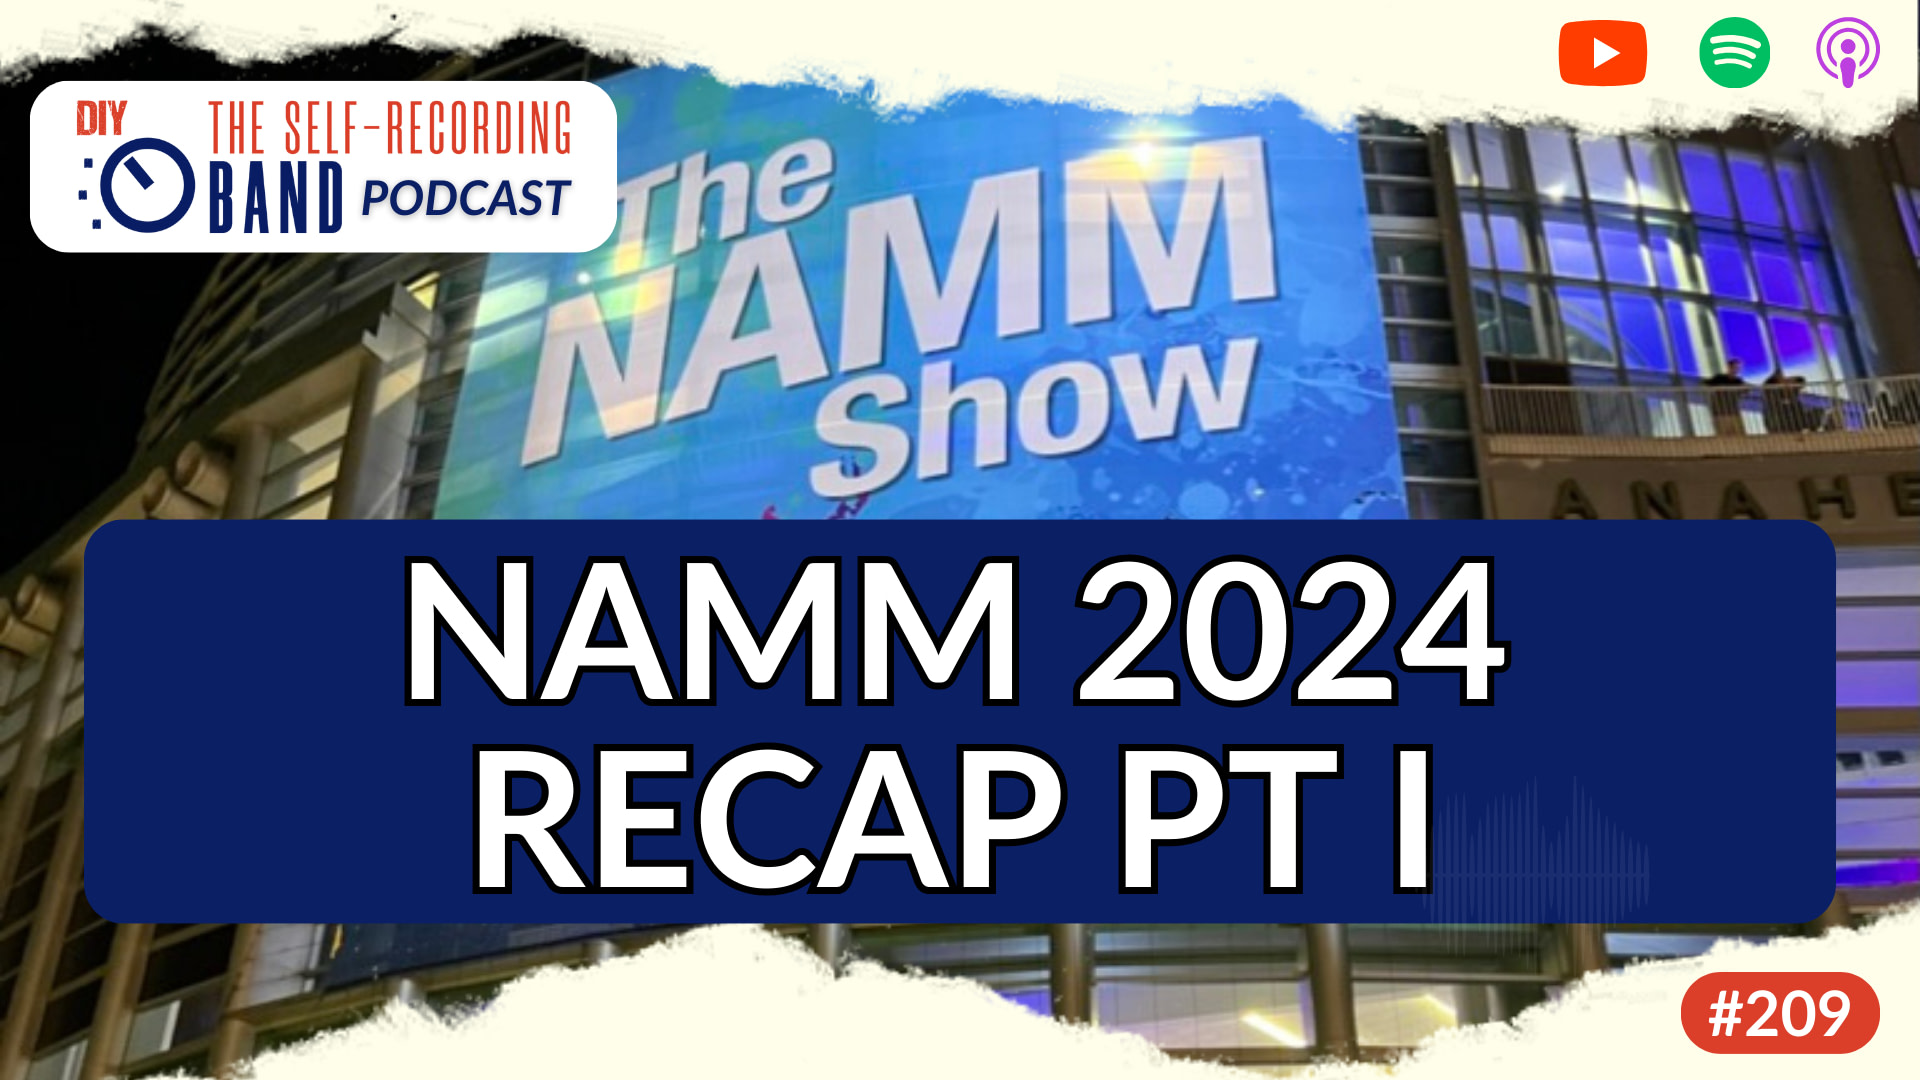 NAMM 2024 Recap Pt I - Great People, Great Gear, Great Takeaways For You